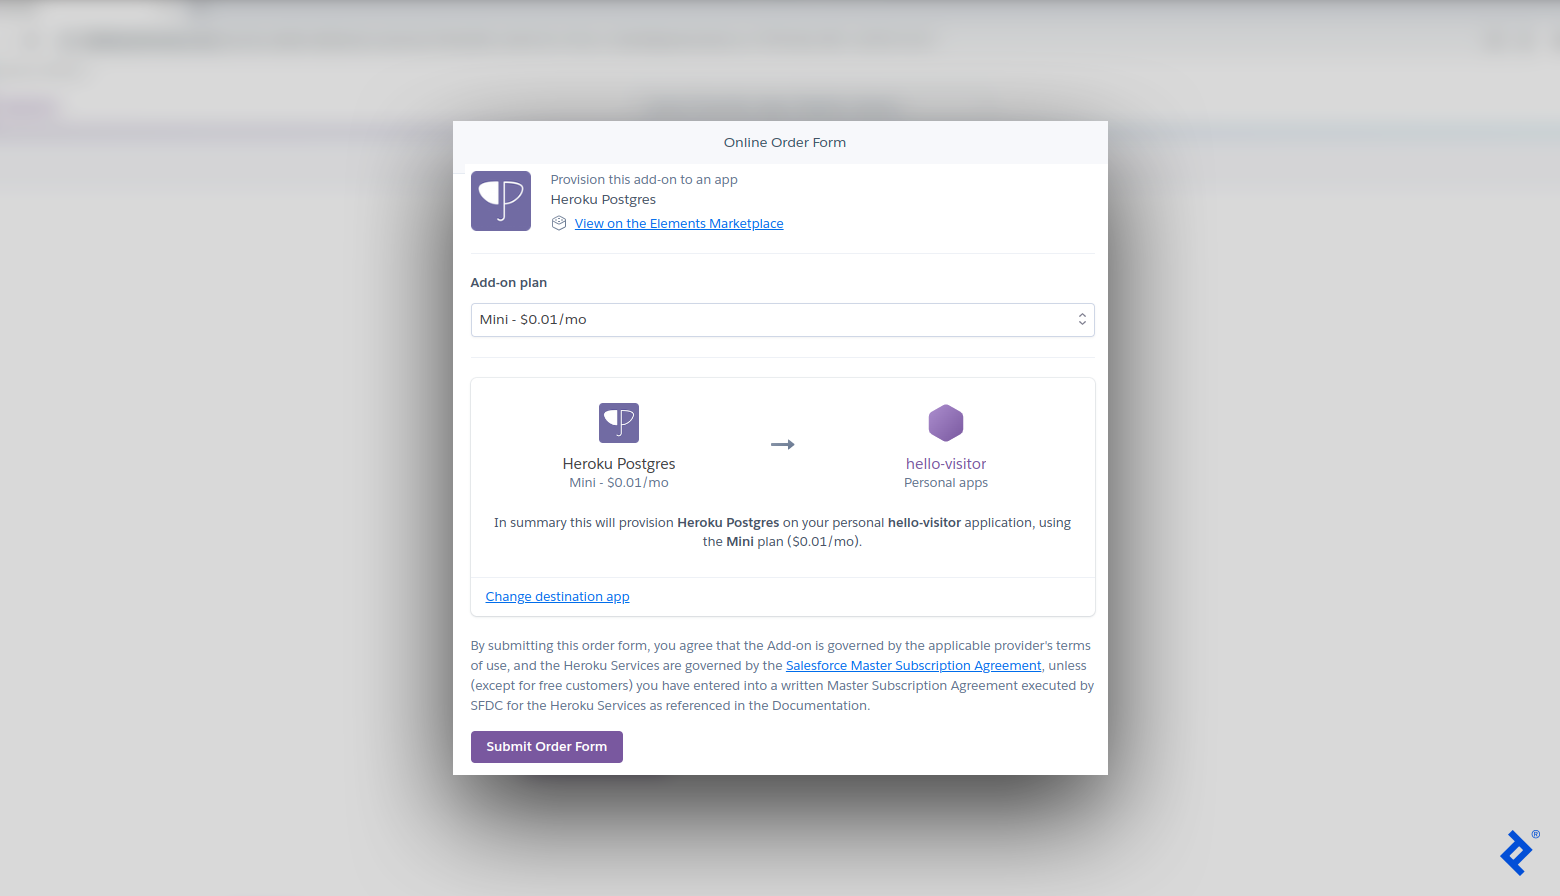 A Heroku administration page called Online Order Form shows that Postgres is being selected as an add-on to the hello-visitor app. This database is being added under the Heroku Mini plan as selected from a drop-down menu. A purple Submit Order Form button is at the bottom.